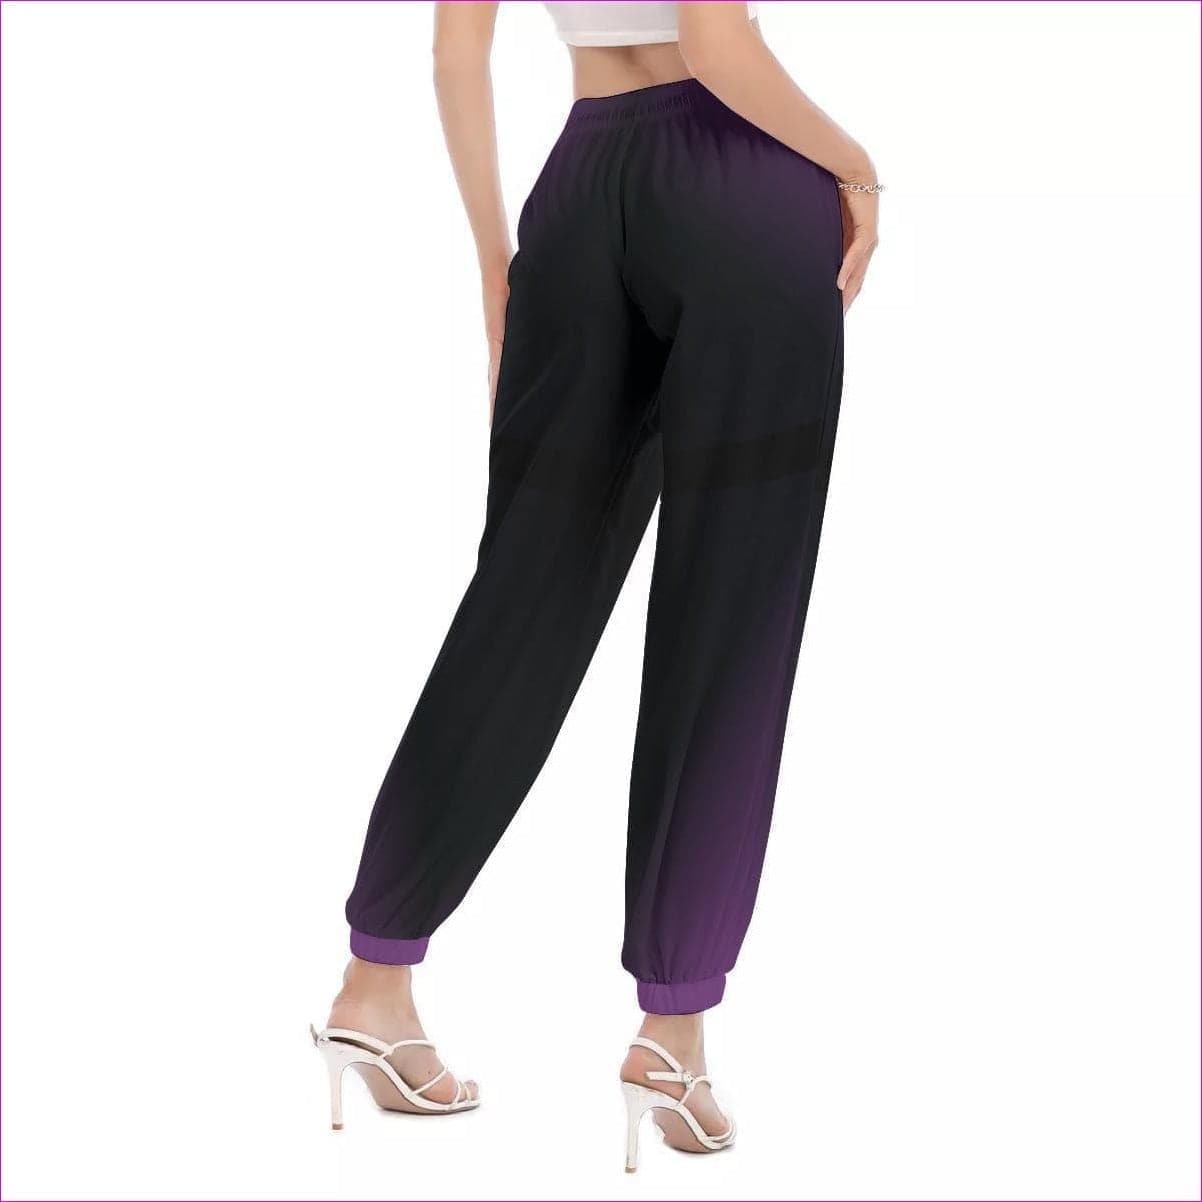 Fade Womens Slim Bloomers - women's pants at TFC&H Co.